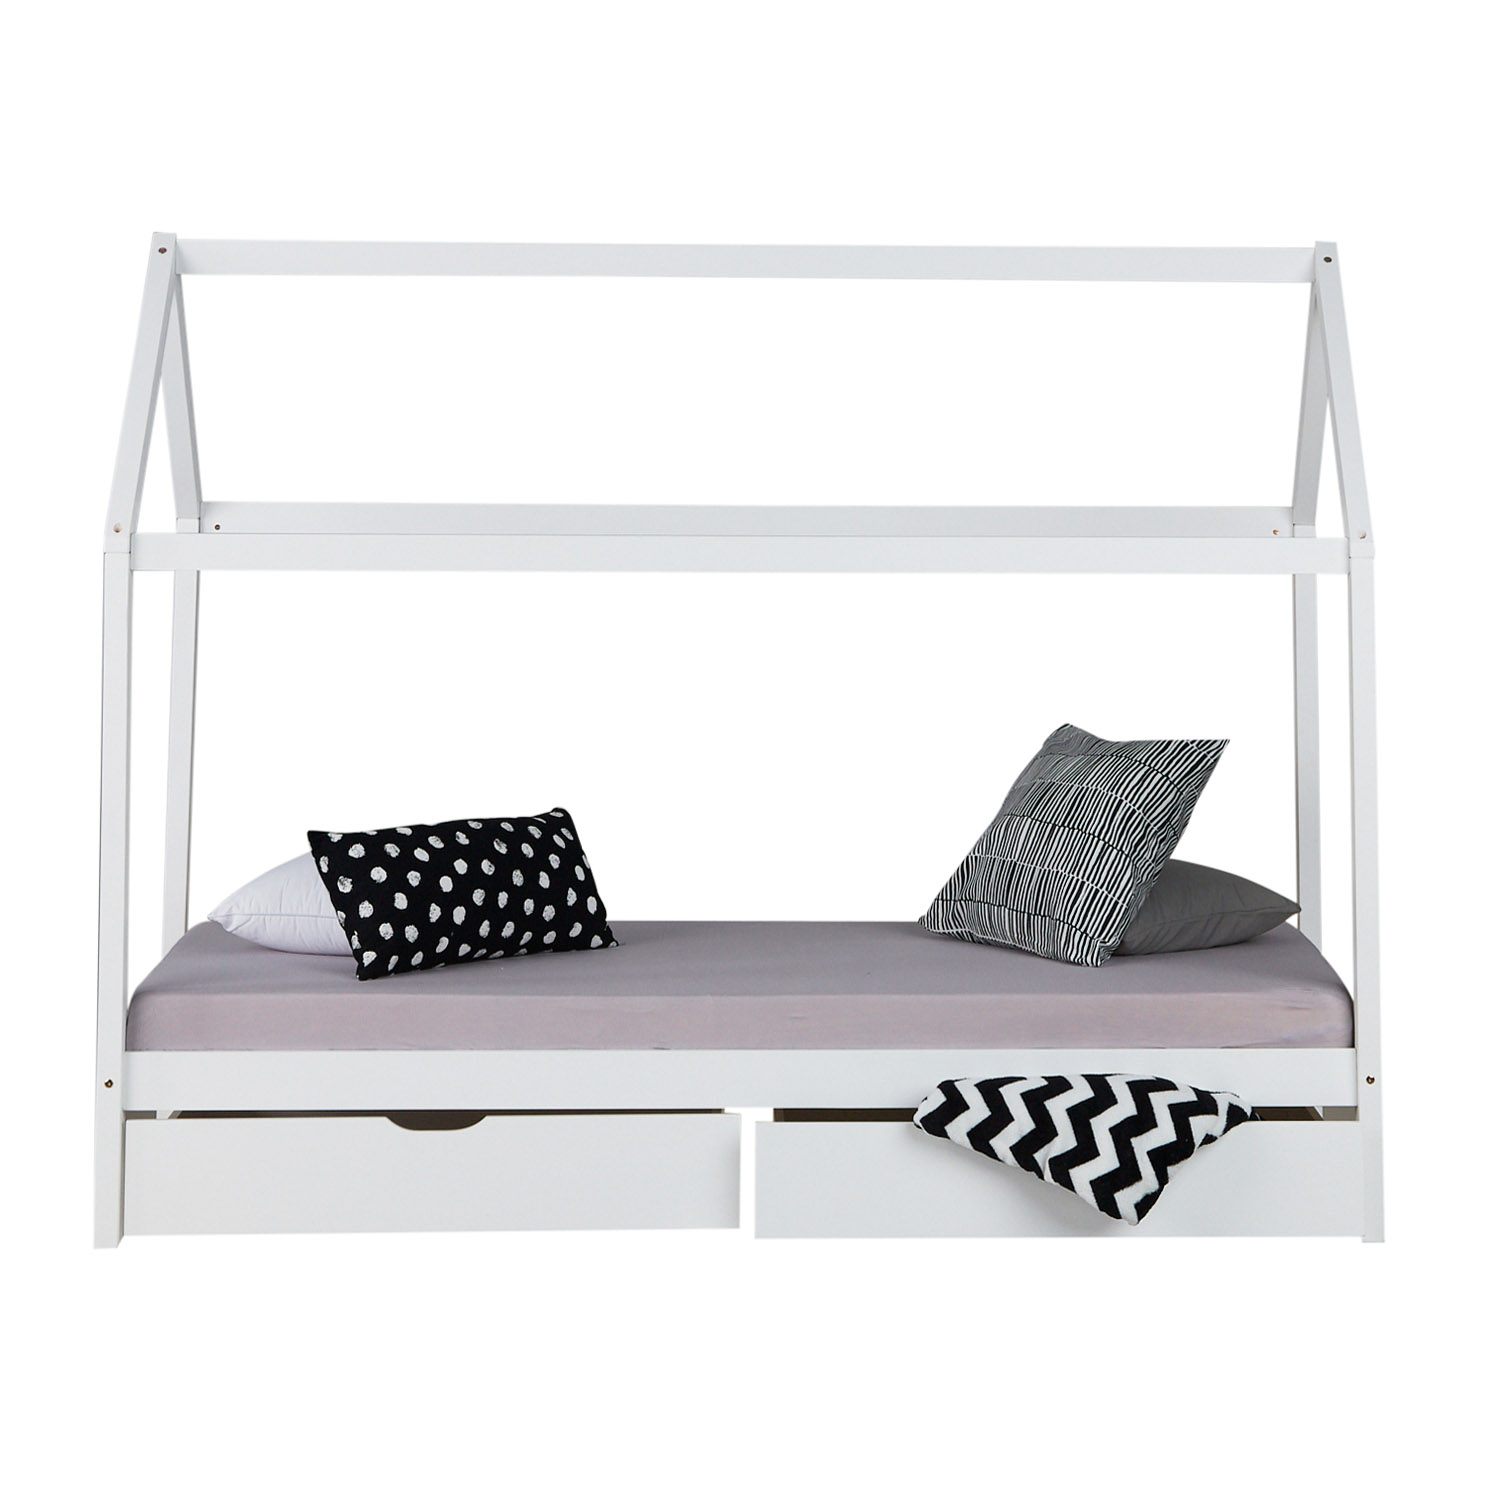 Childrens Bed House Bed Frame For Kids 90x200 cm White With Drawers